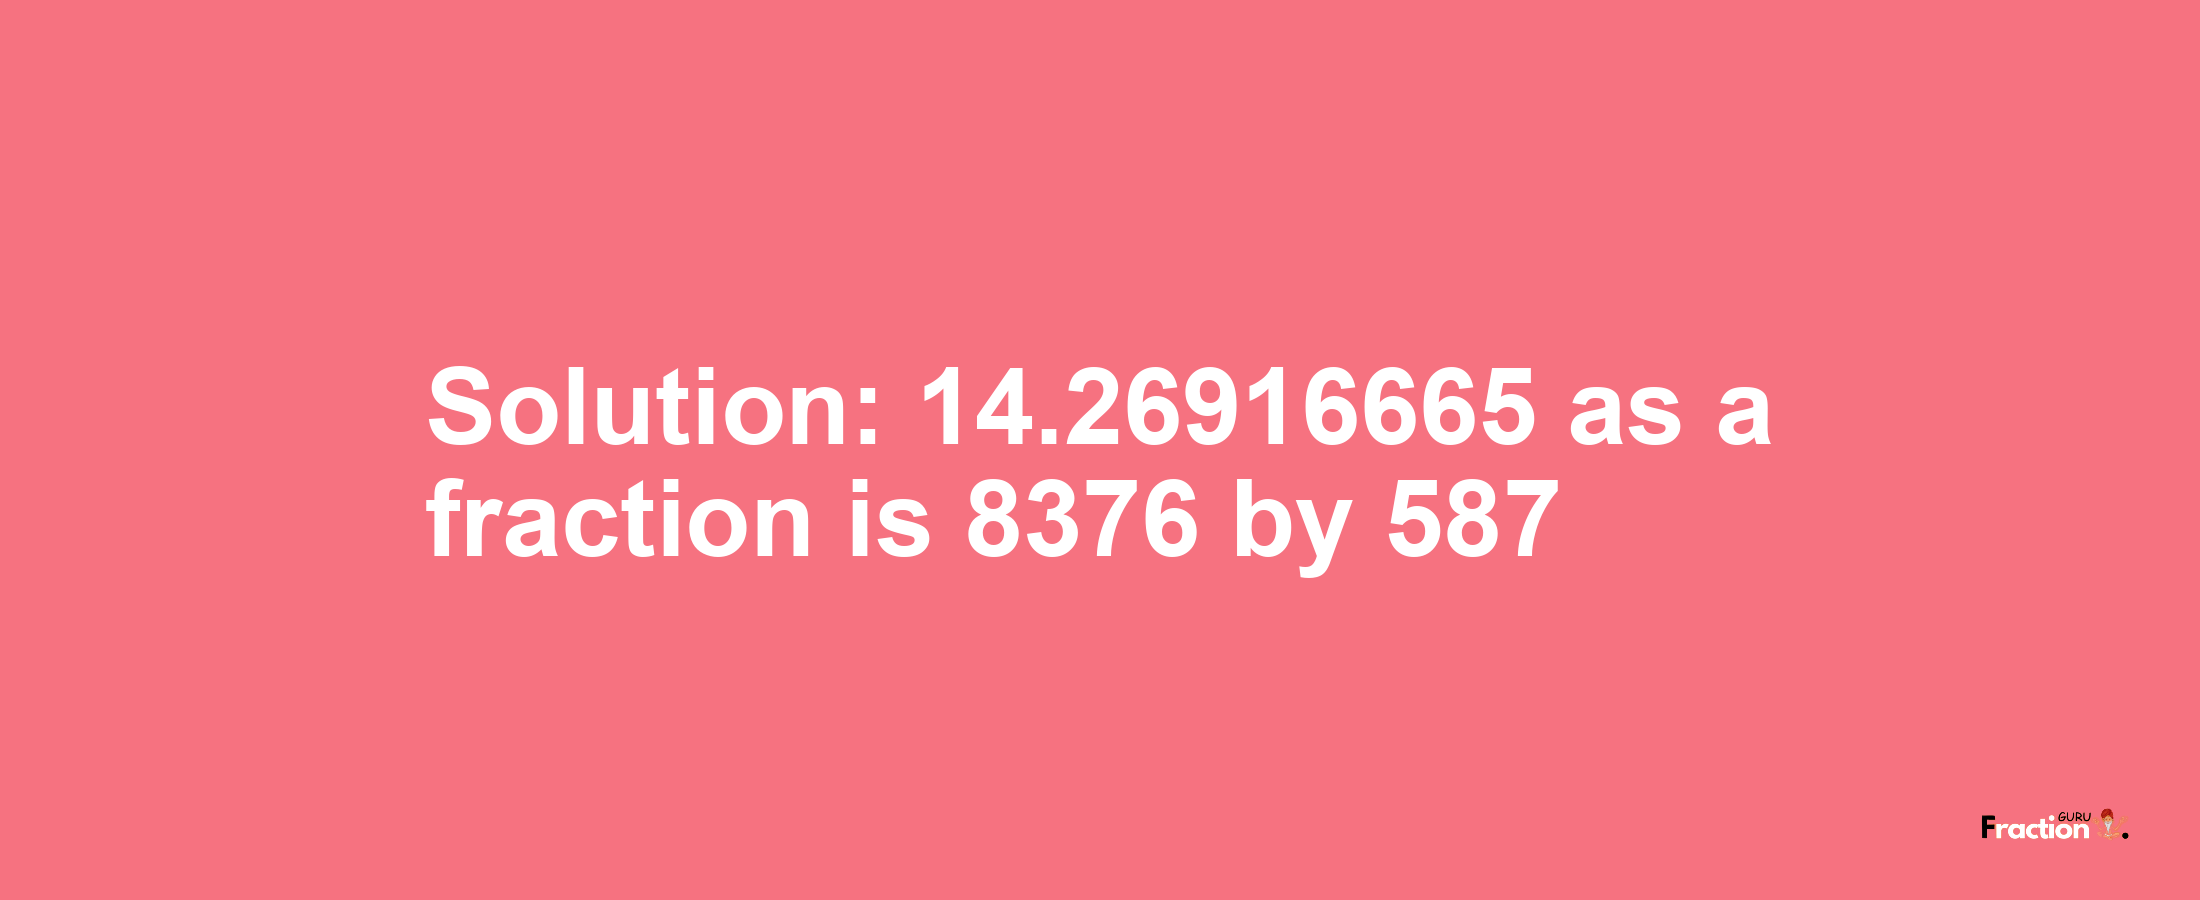 Solution:14.26916665 as a fraction is 8376/587